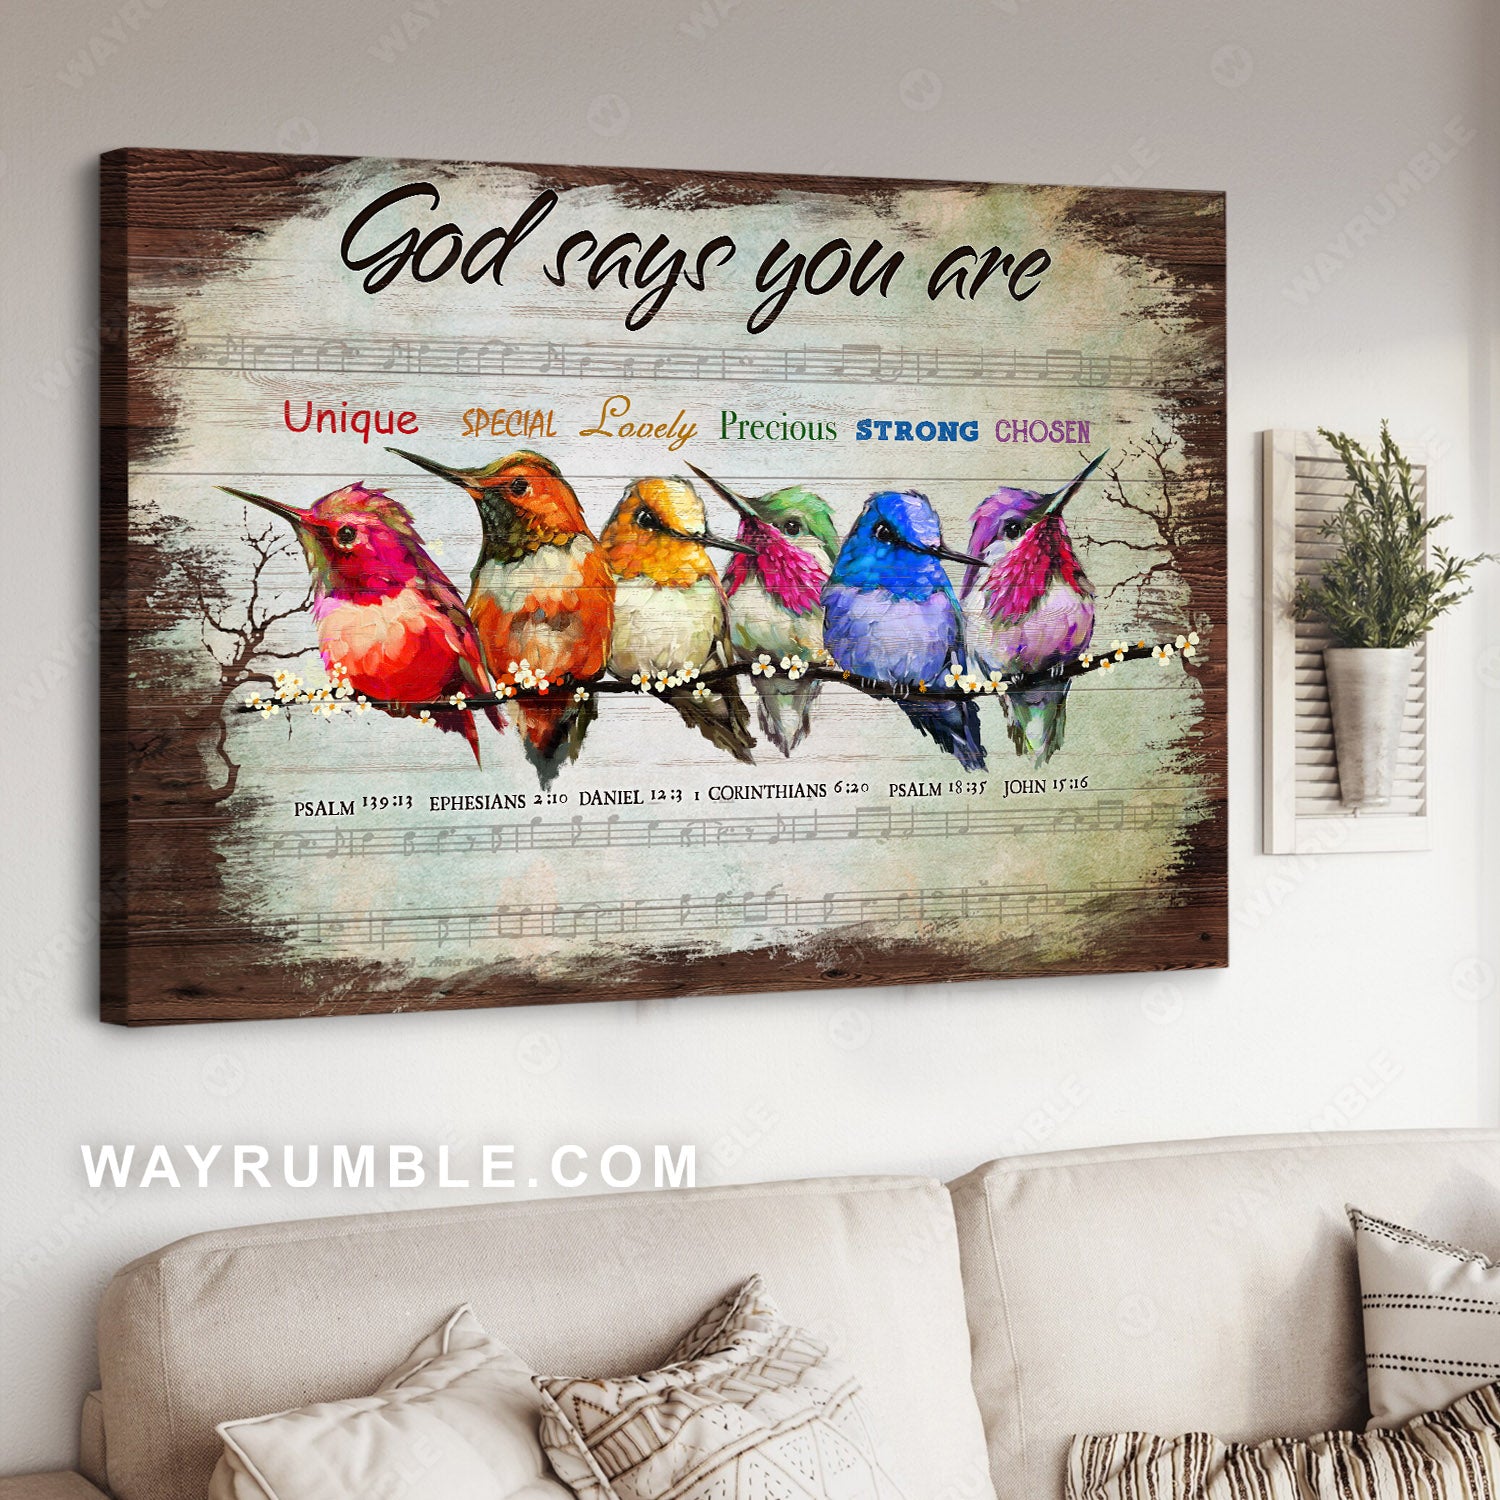 Hummingbird painting, Music sheet, God says you are - Jesus Landscape Canvas Prints, Christian Wall Art